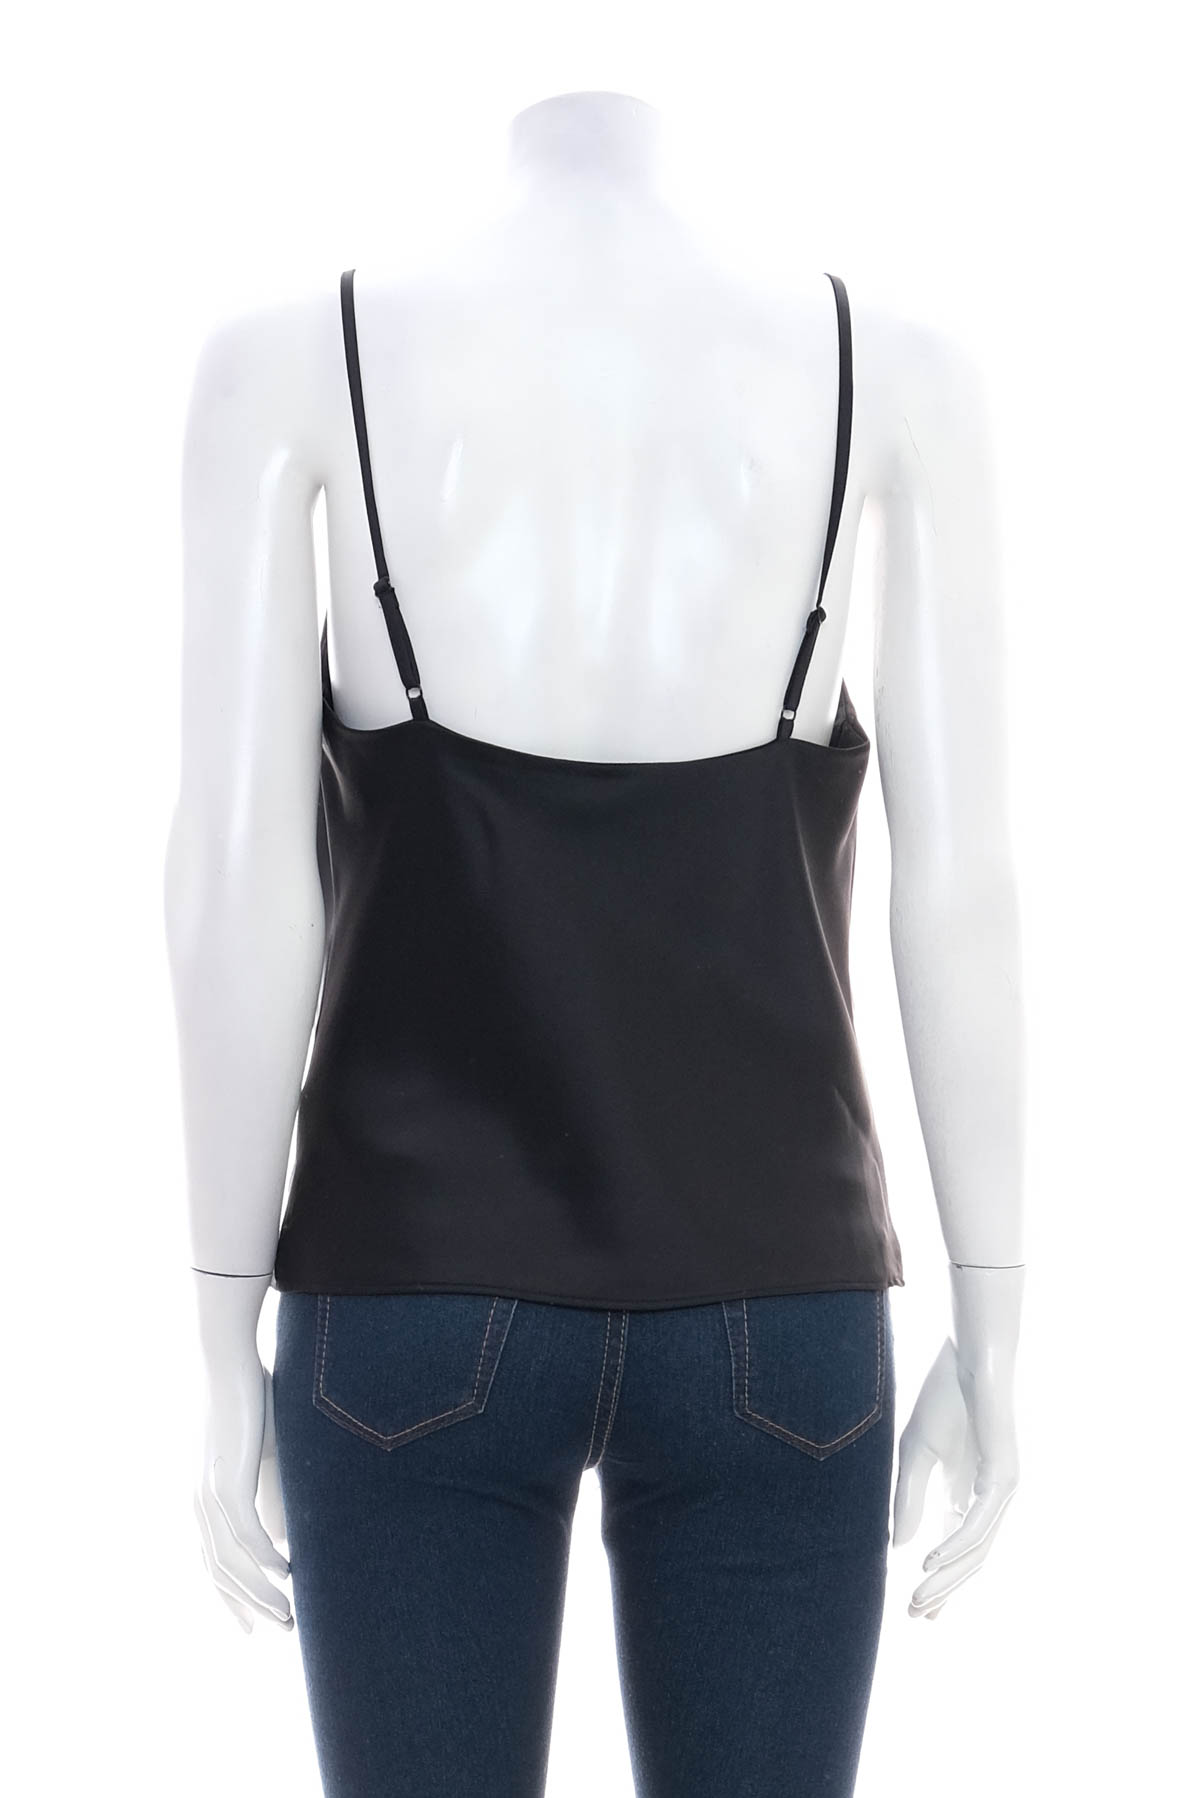 Women's top - Gina Tricot - 1